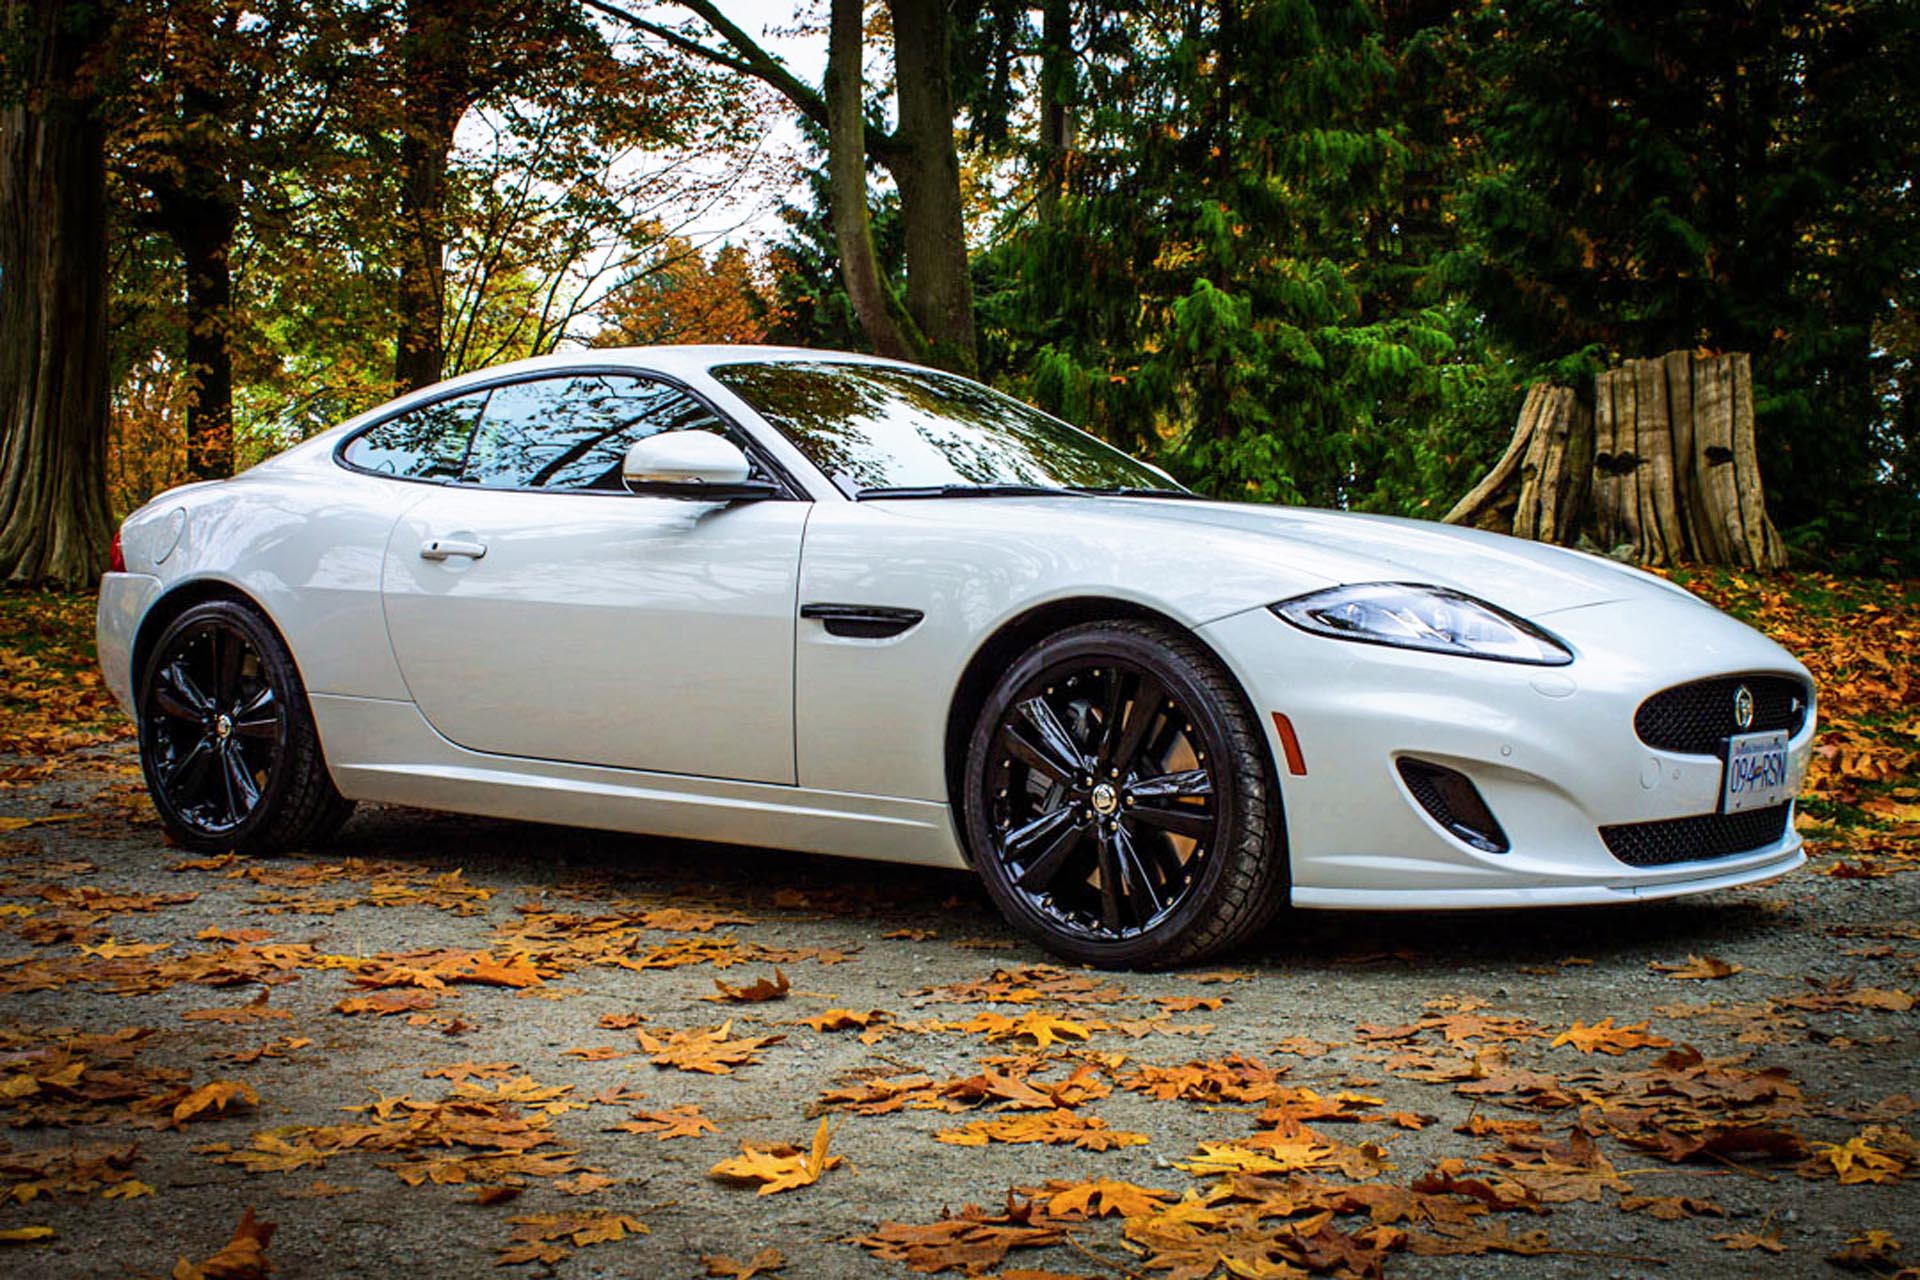 Used Vehicle Review: Jaguar XK and XKR, 2007-2014 - Autos.ca